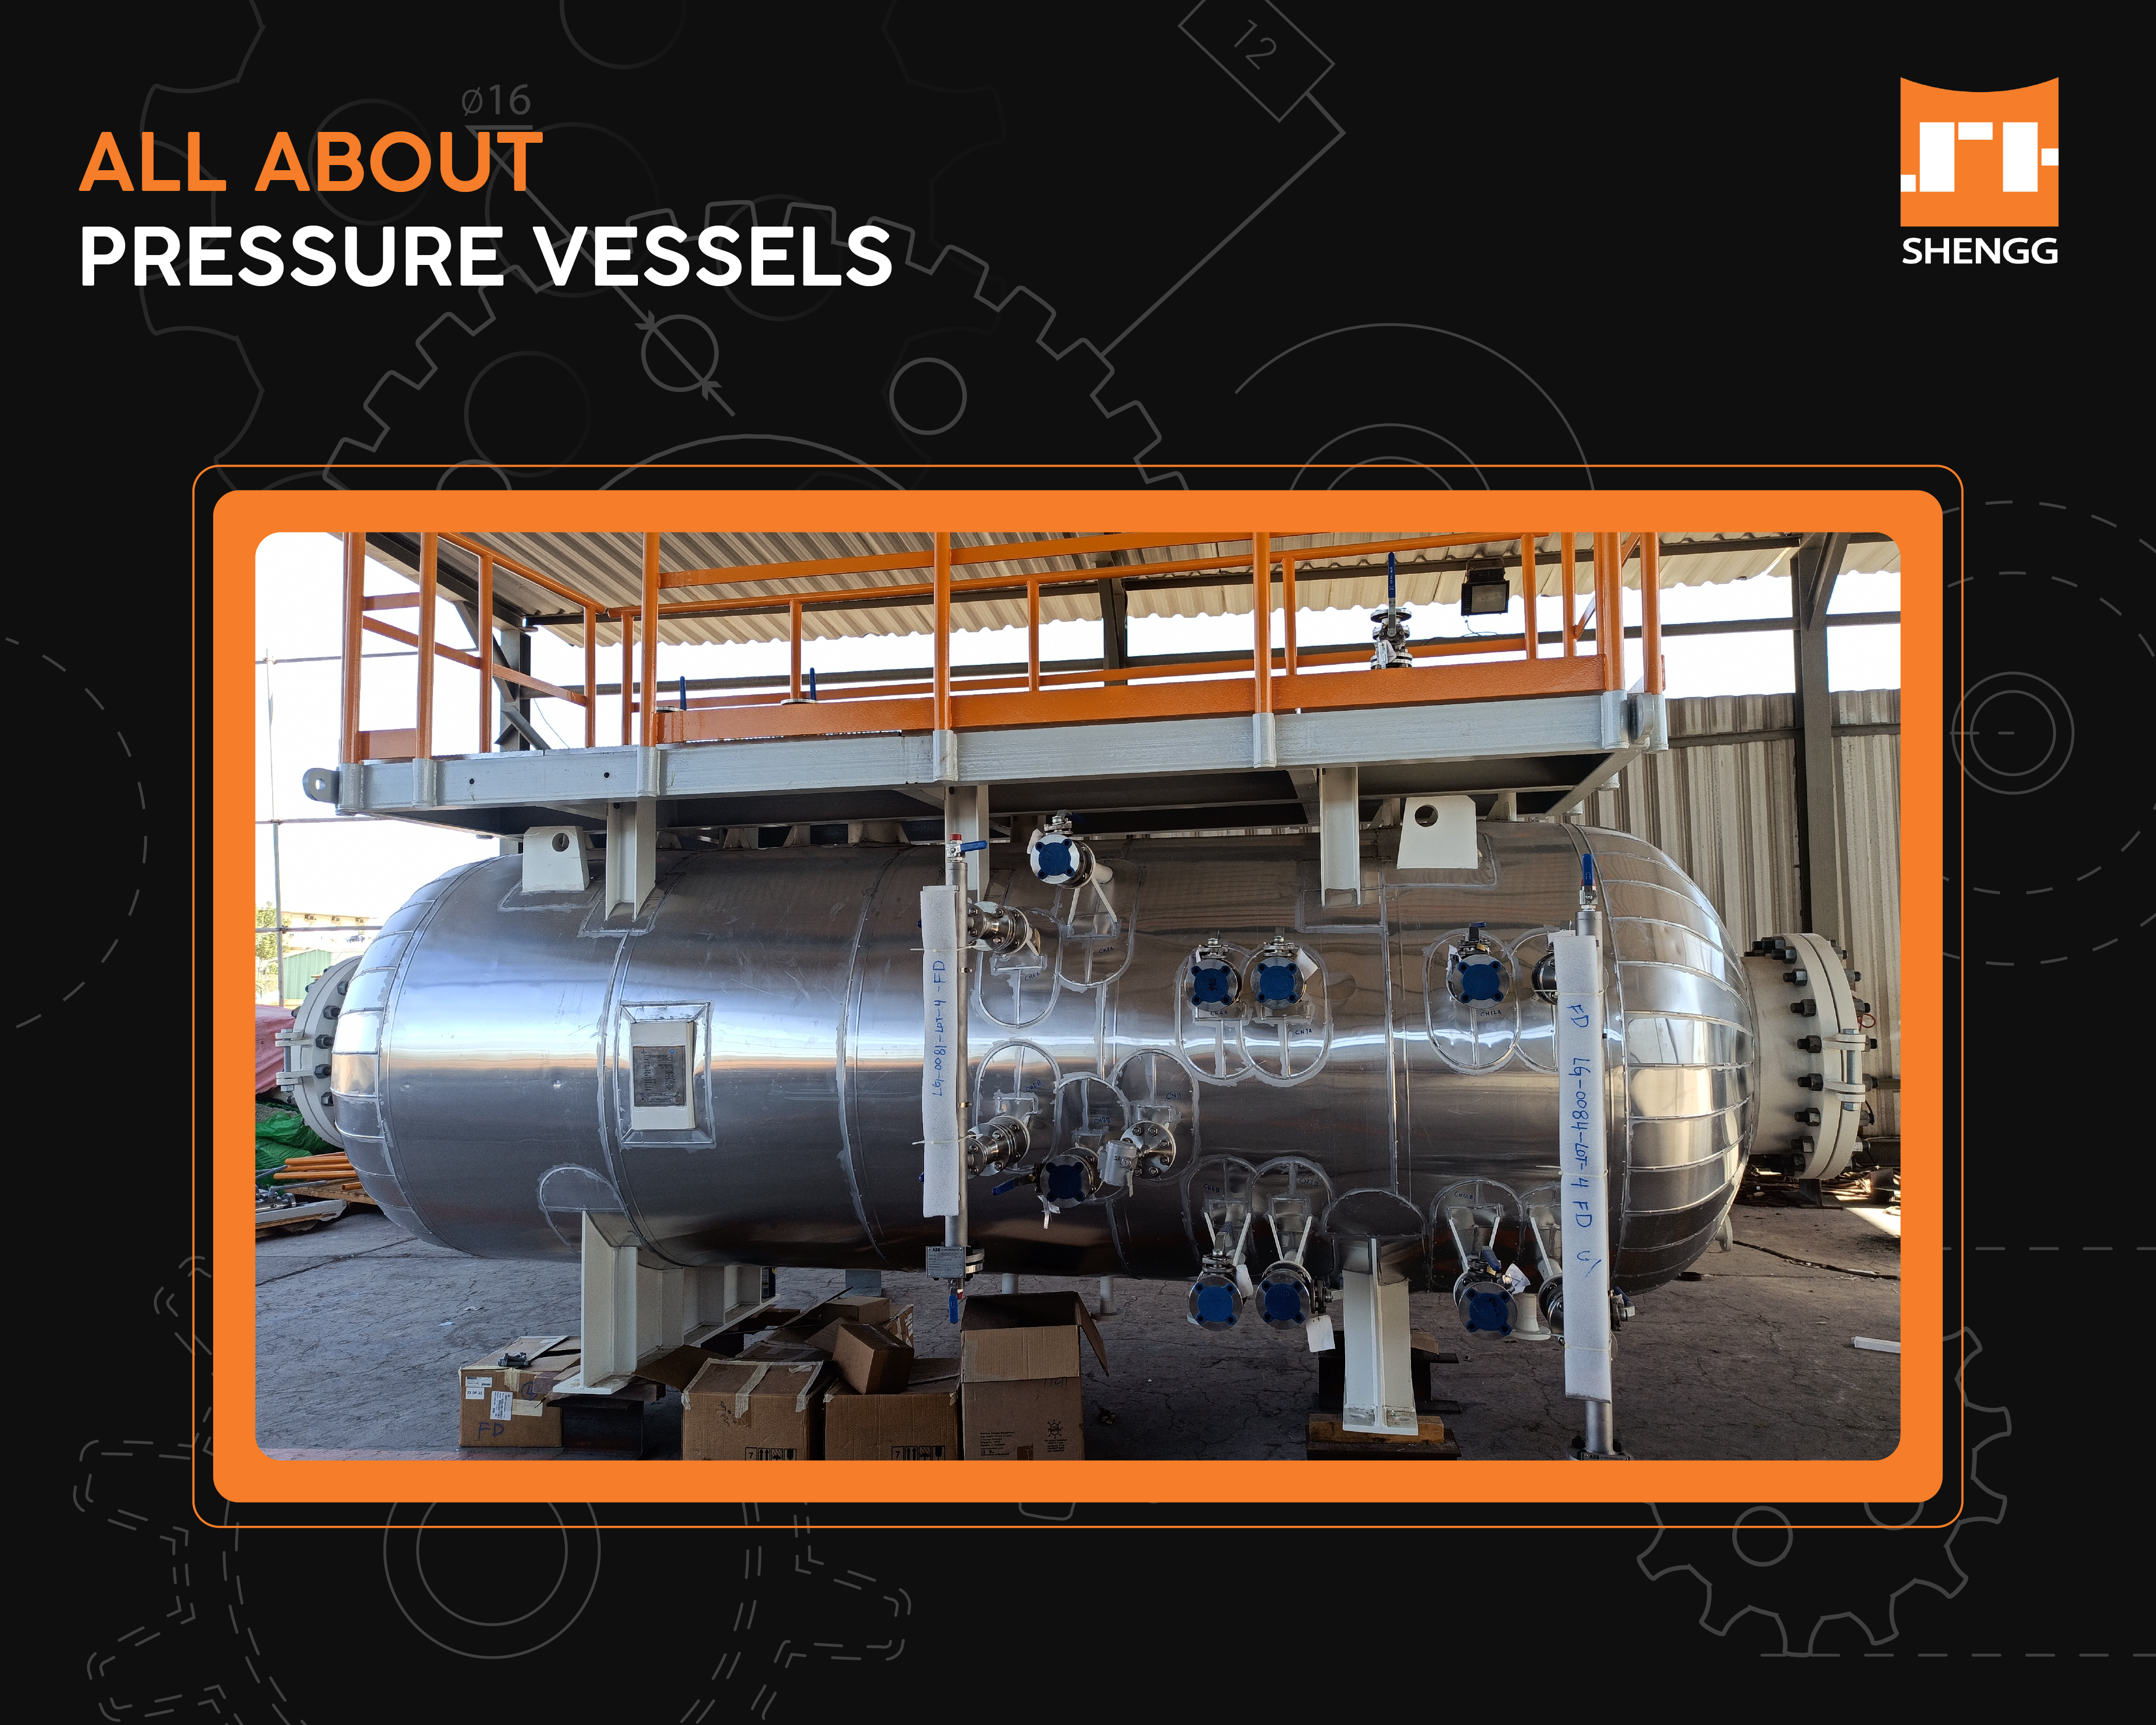 All About: Pressure Vessels